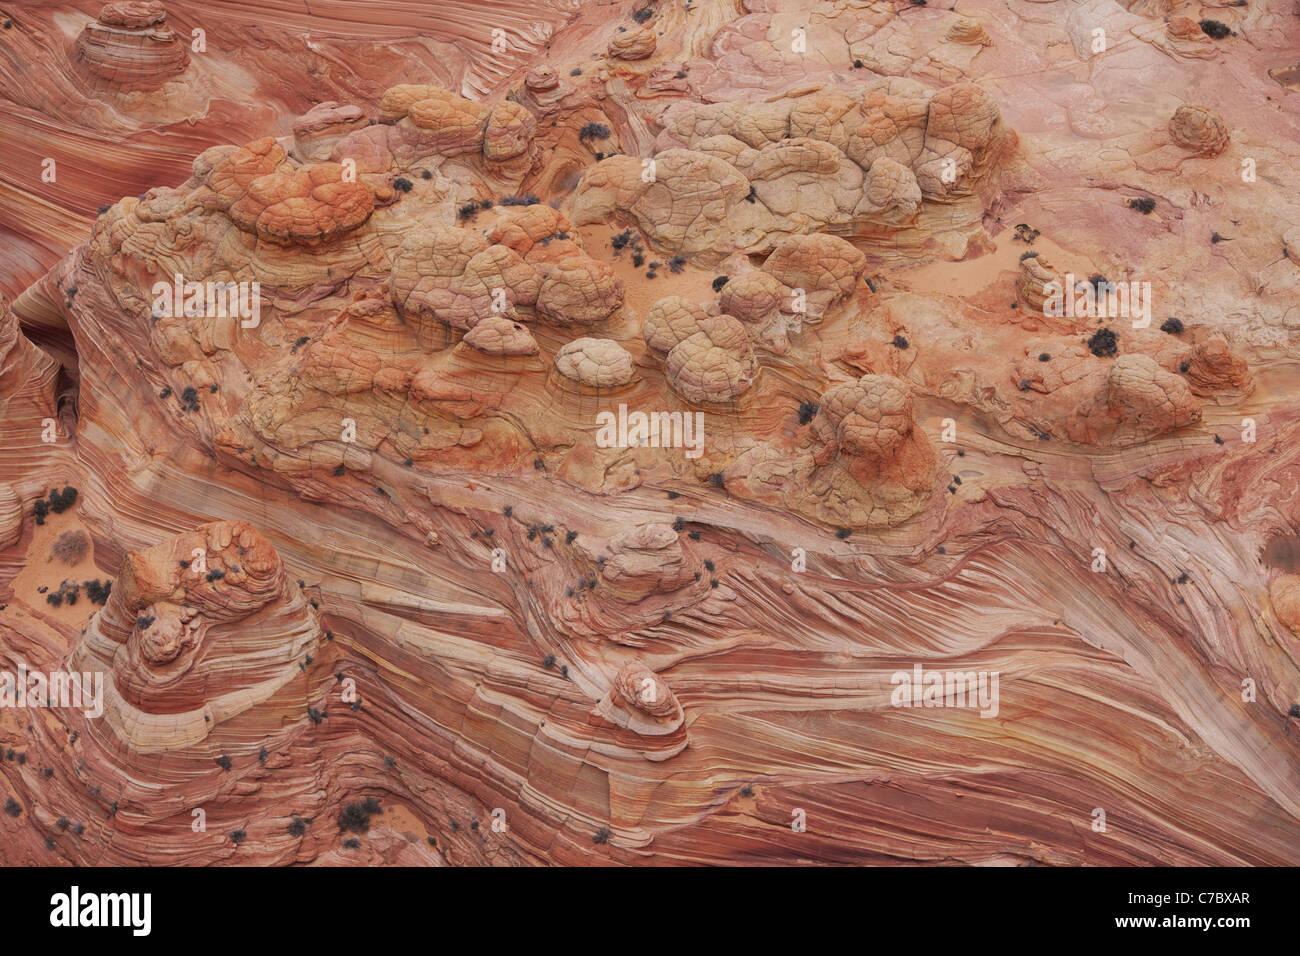 AERIAL VIEW. Scenic reddish sandstone formation of strata and mounds. Vermilion Cliffs National Monument, Coconino County, Arizona, USA. Stock Photo